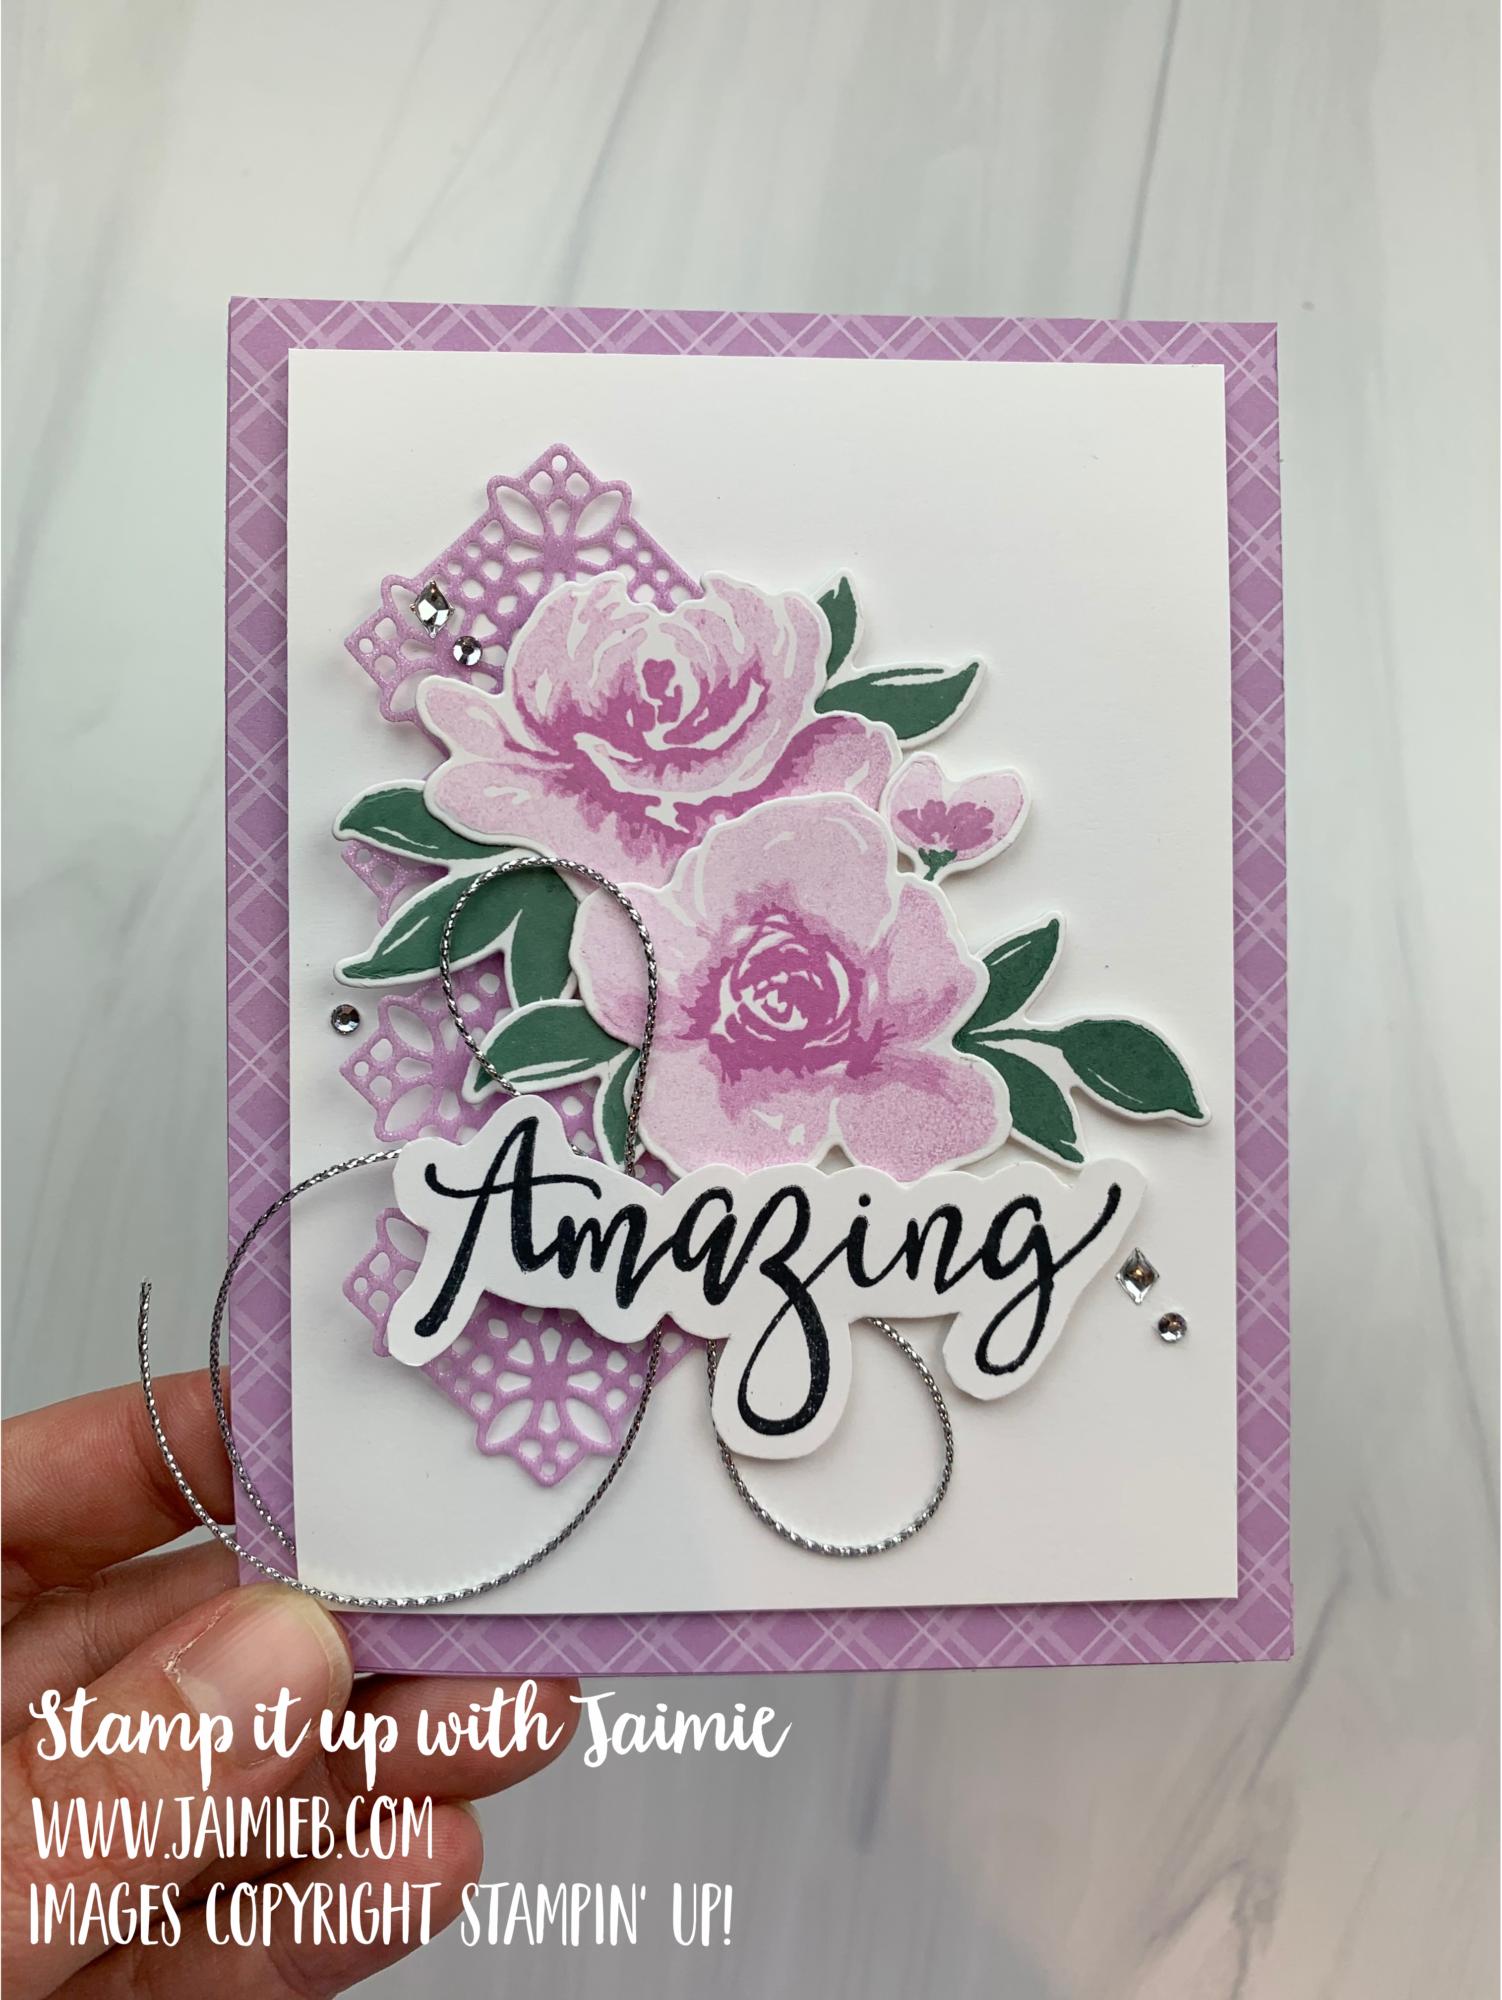 Stampin’ Up! All Things Fabulous Card